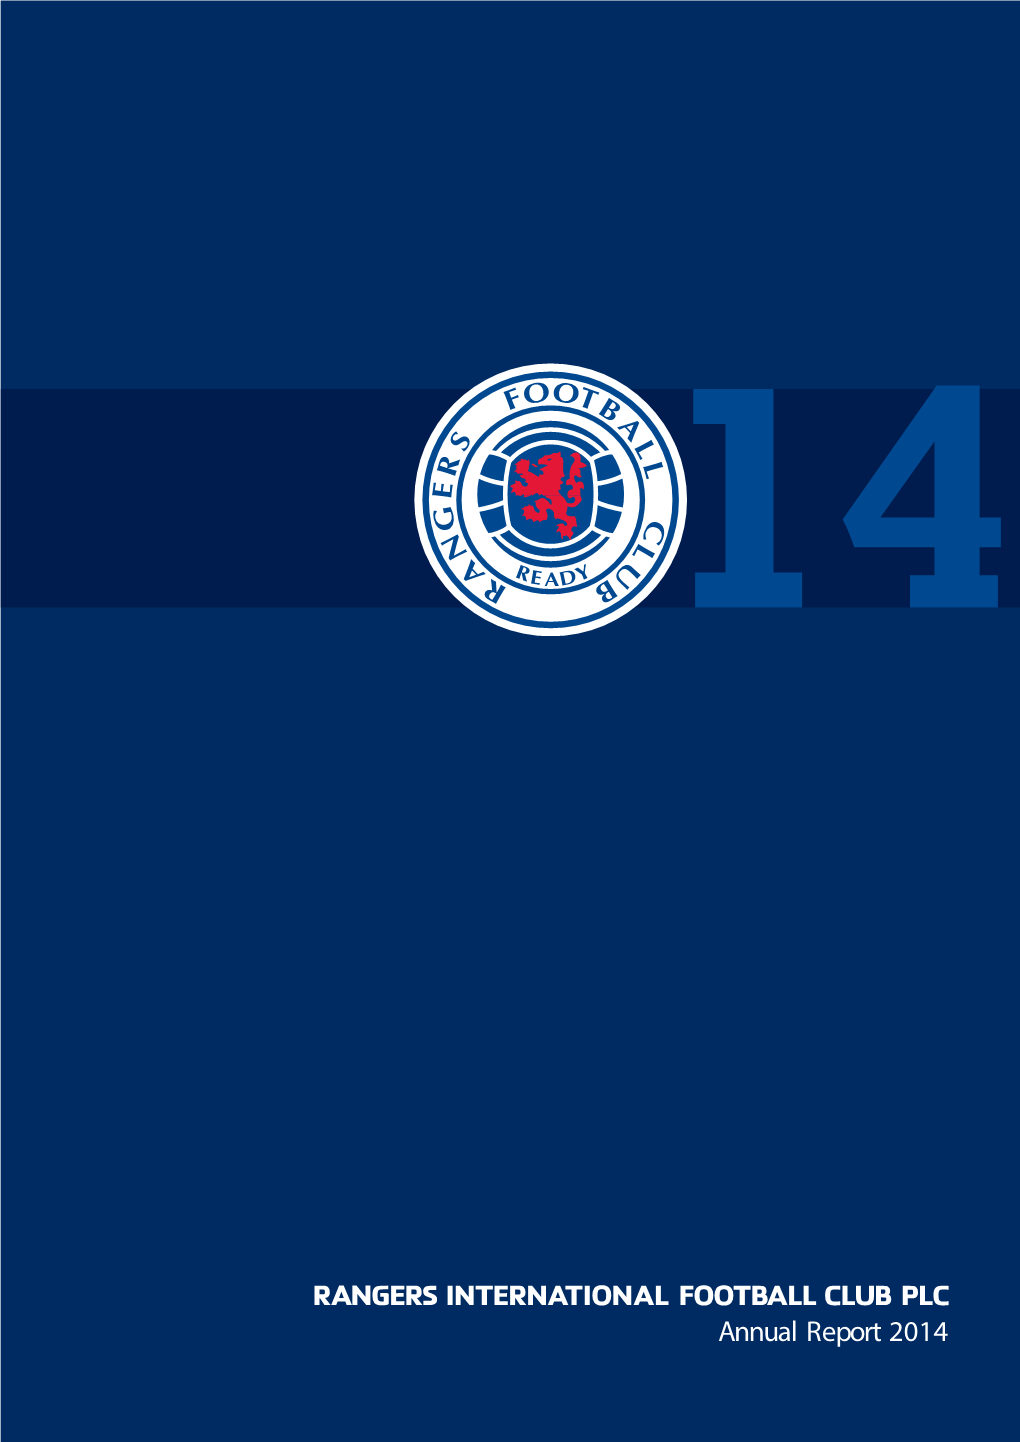 164581 Rangers Annual Report Pt1 164581 Rangers Annual Report Pt1 27/11/2014 18:03 Page 1 14